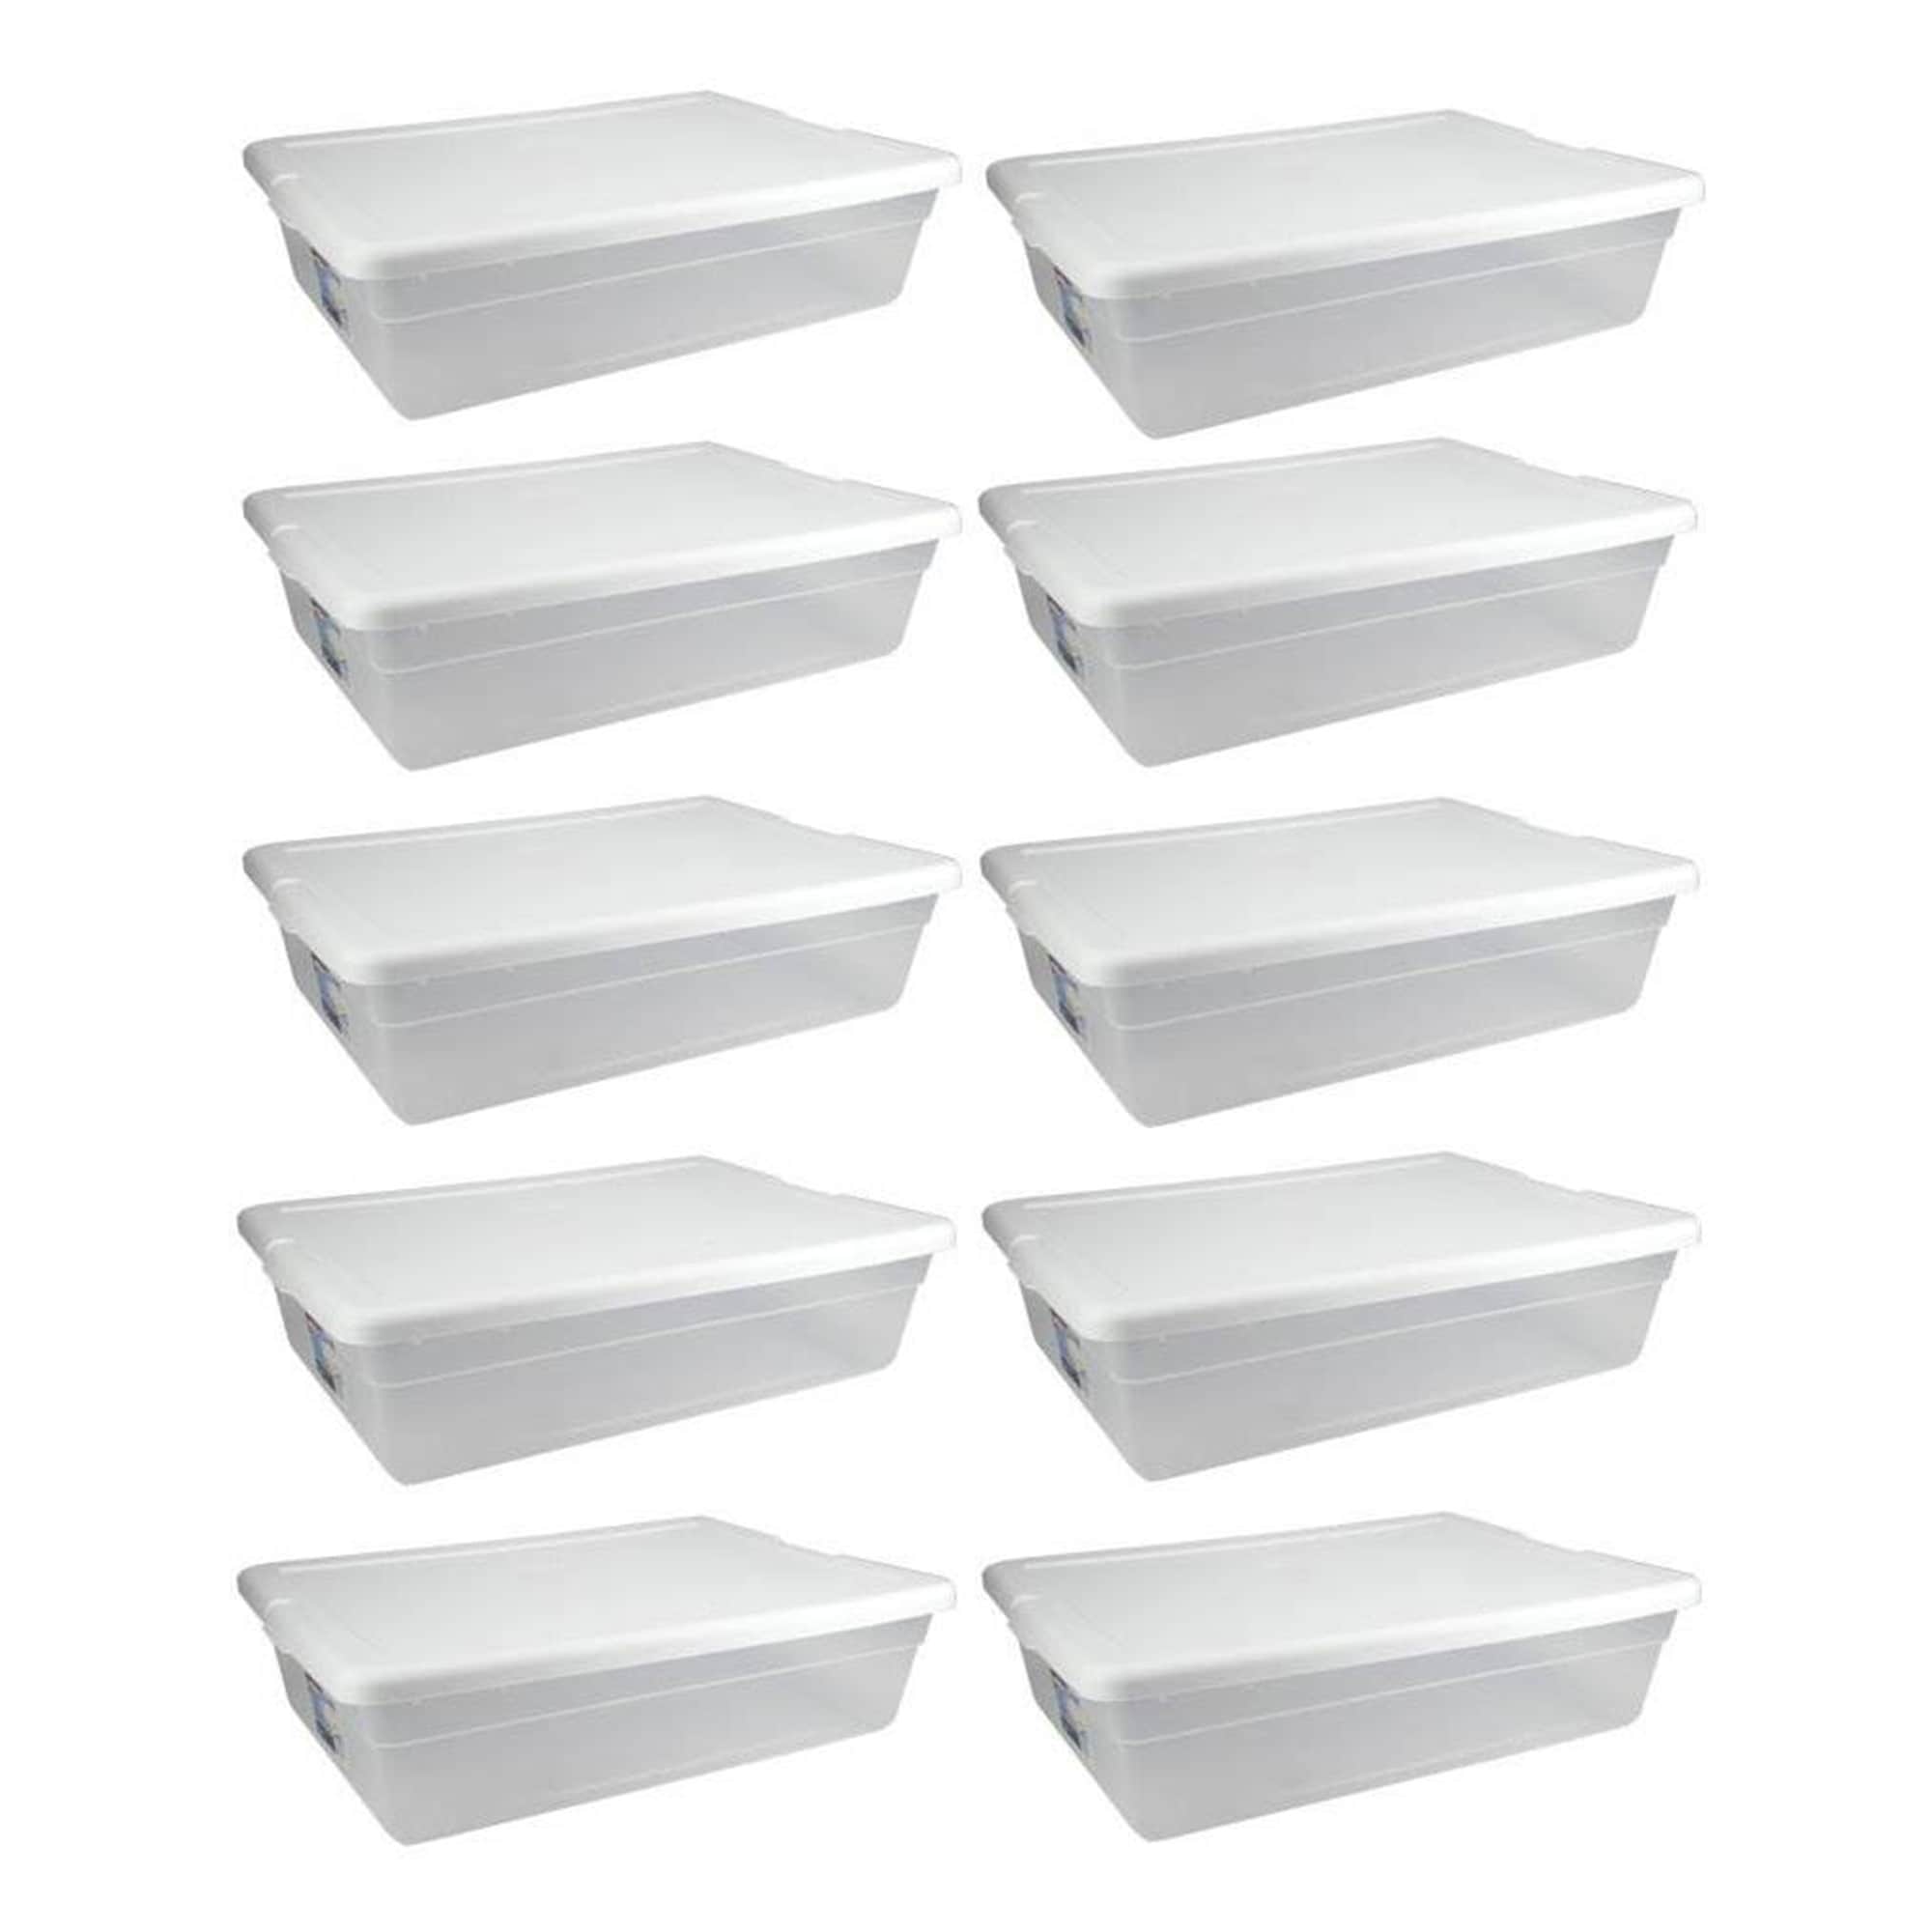 https://ak1.ostkcdn.com/images/products/is/images/direct/7031205de4d440623e68c879baafa540a5a26dc5/Sterilite-28-Qt-Clear-Stackable-Under-Bed-Organizer-Storage-Container%2C-%2810-Pack%29.jpg